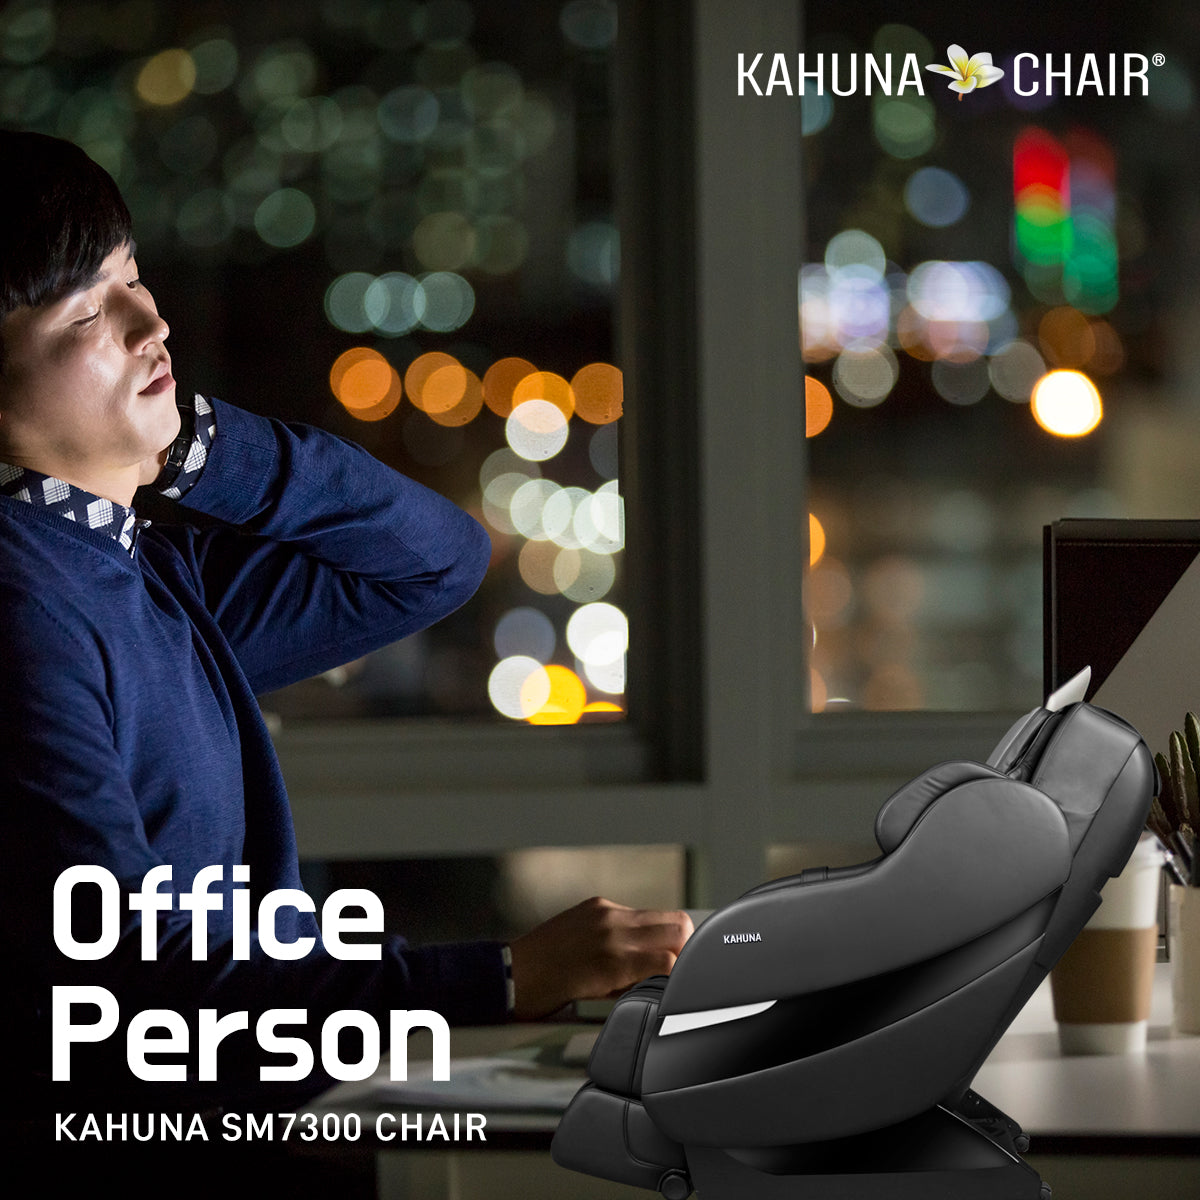 Kahuna SM-7300 Massage Chair for office person